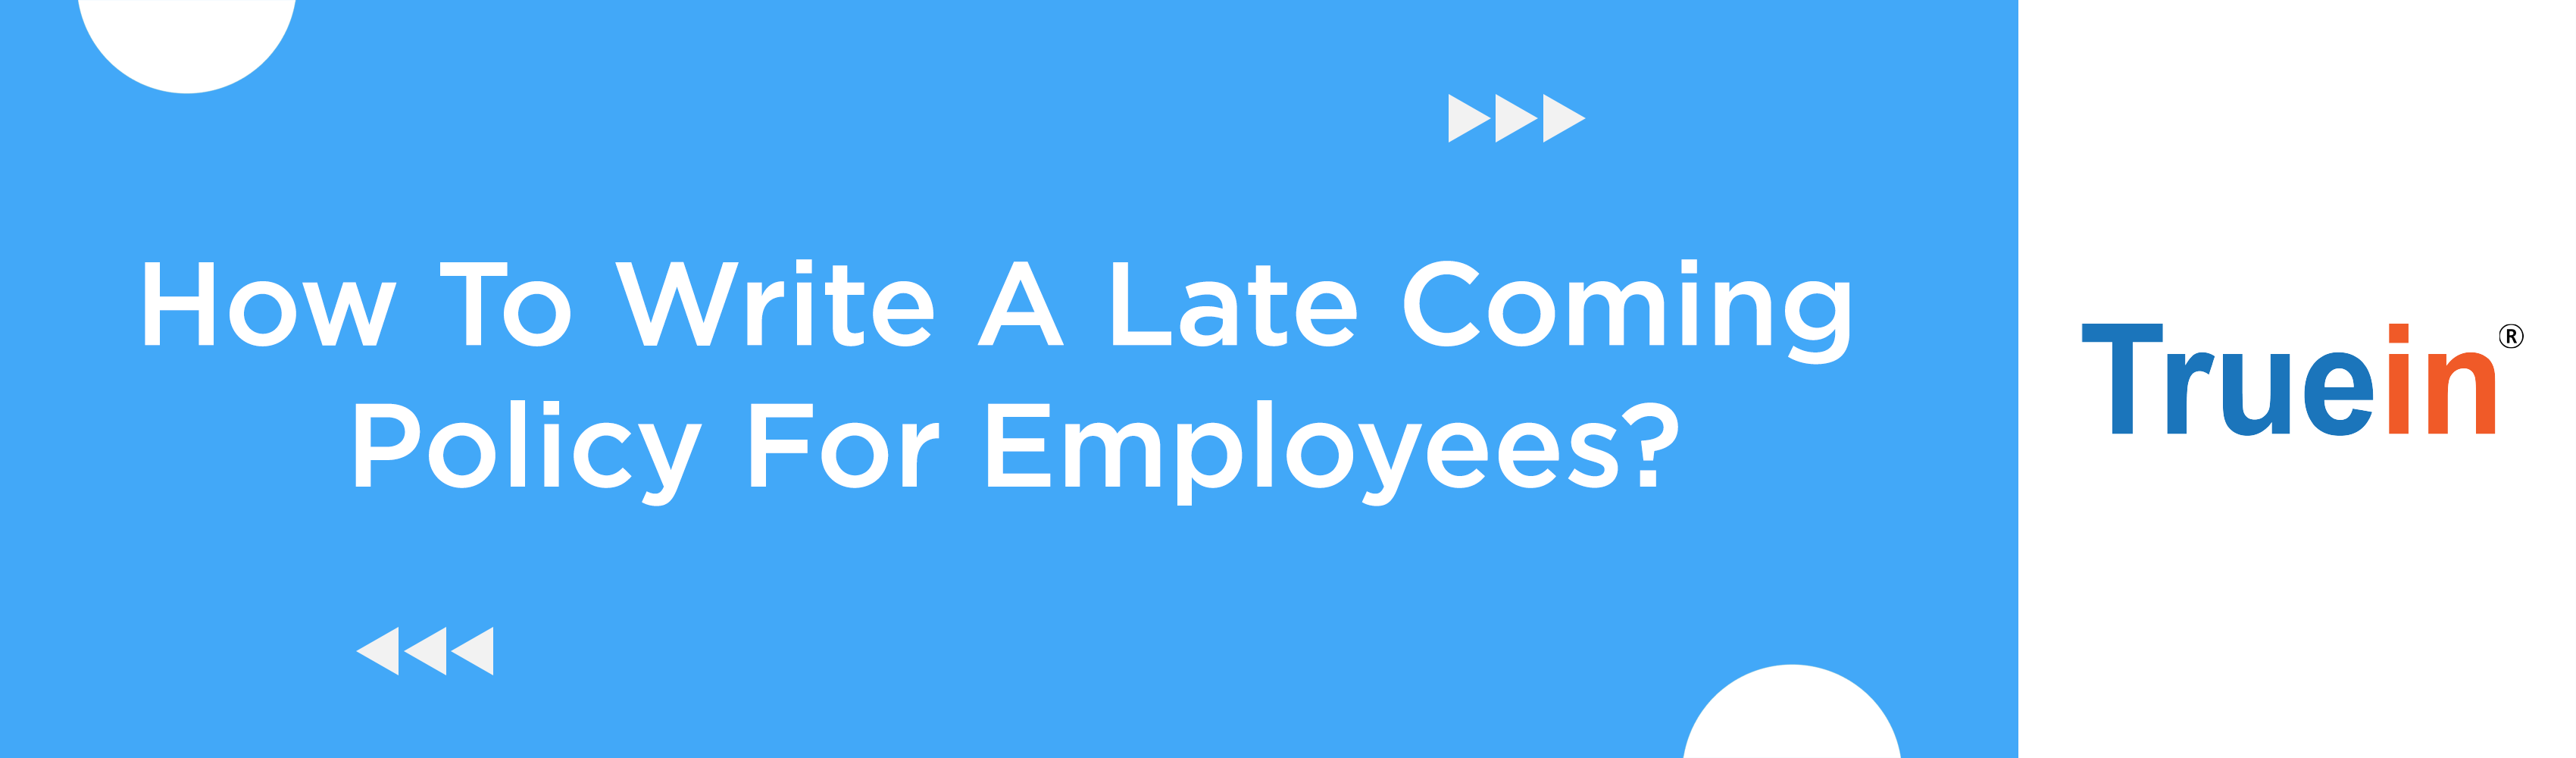 How To Write A Late Coming Policy For Employees?